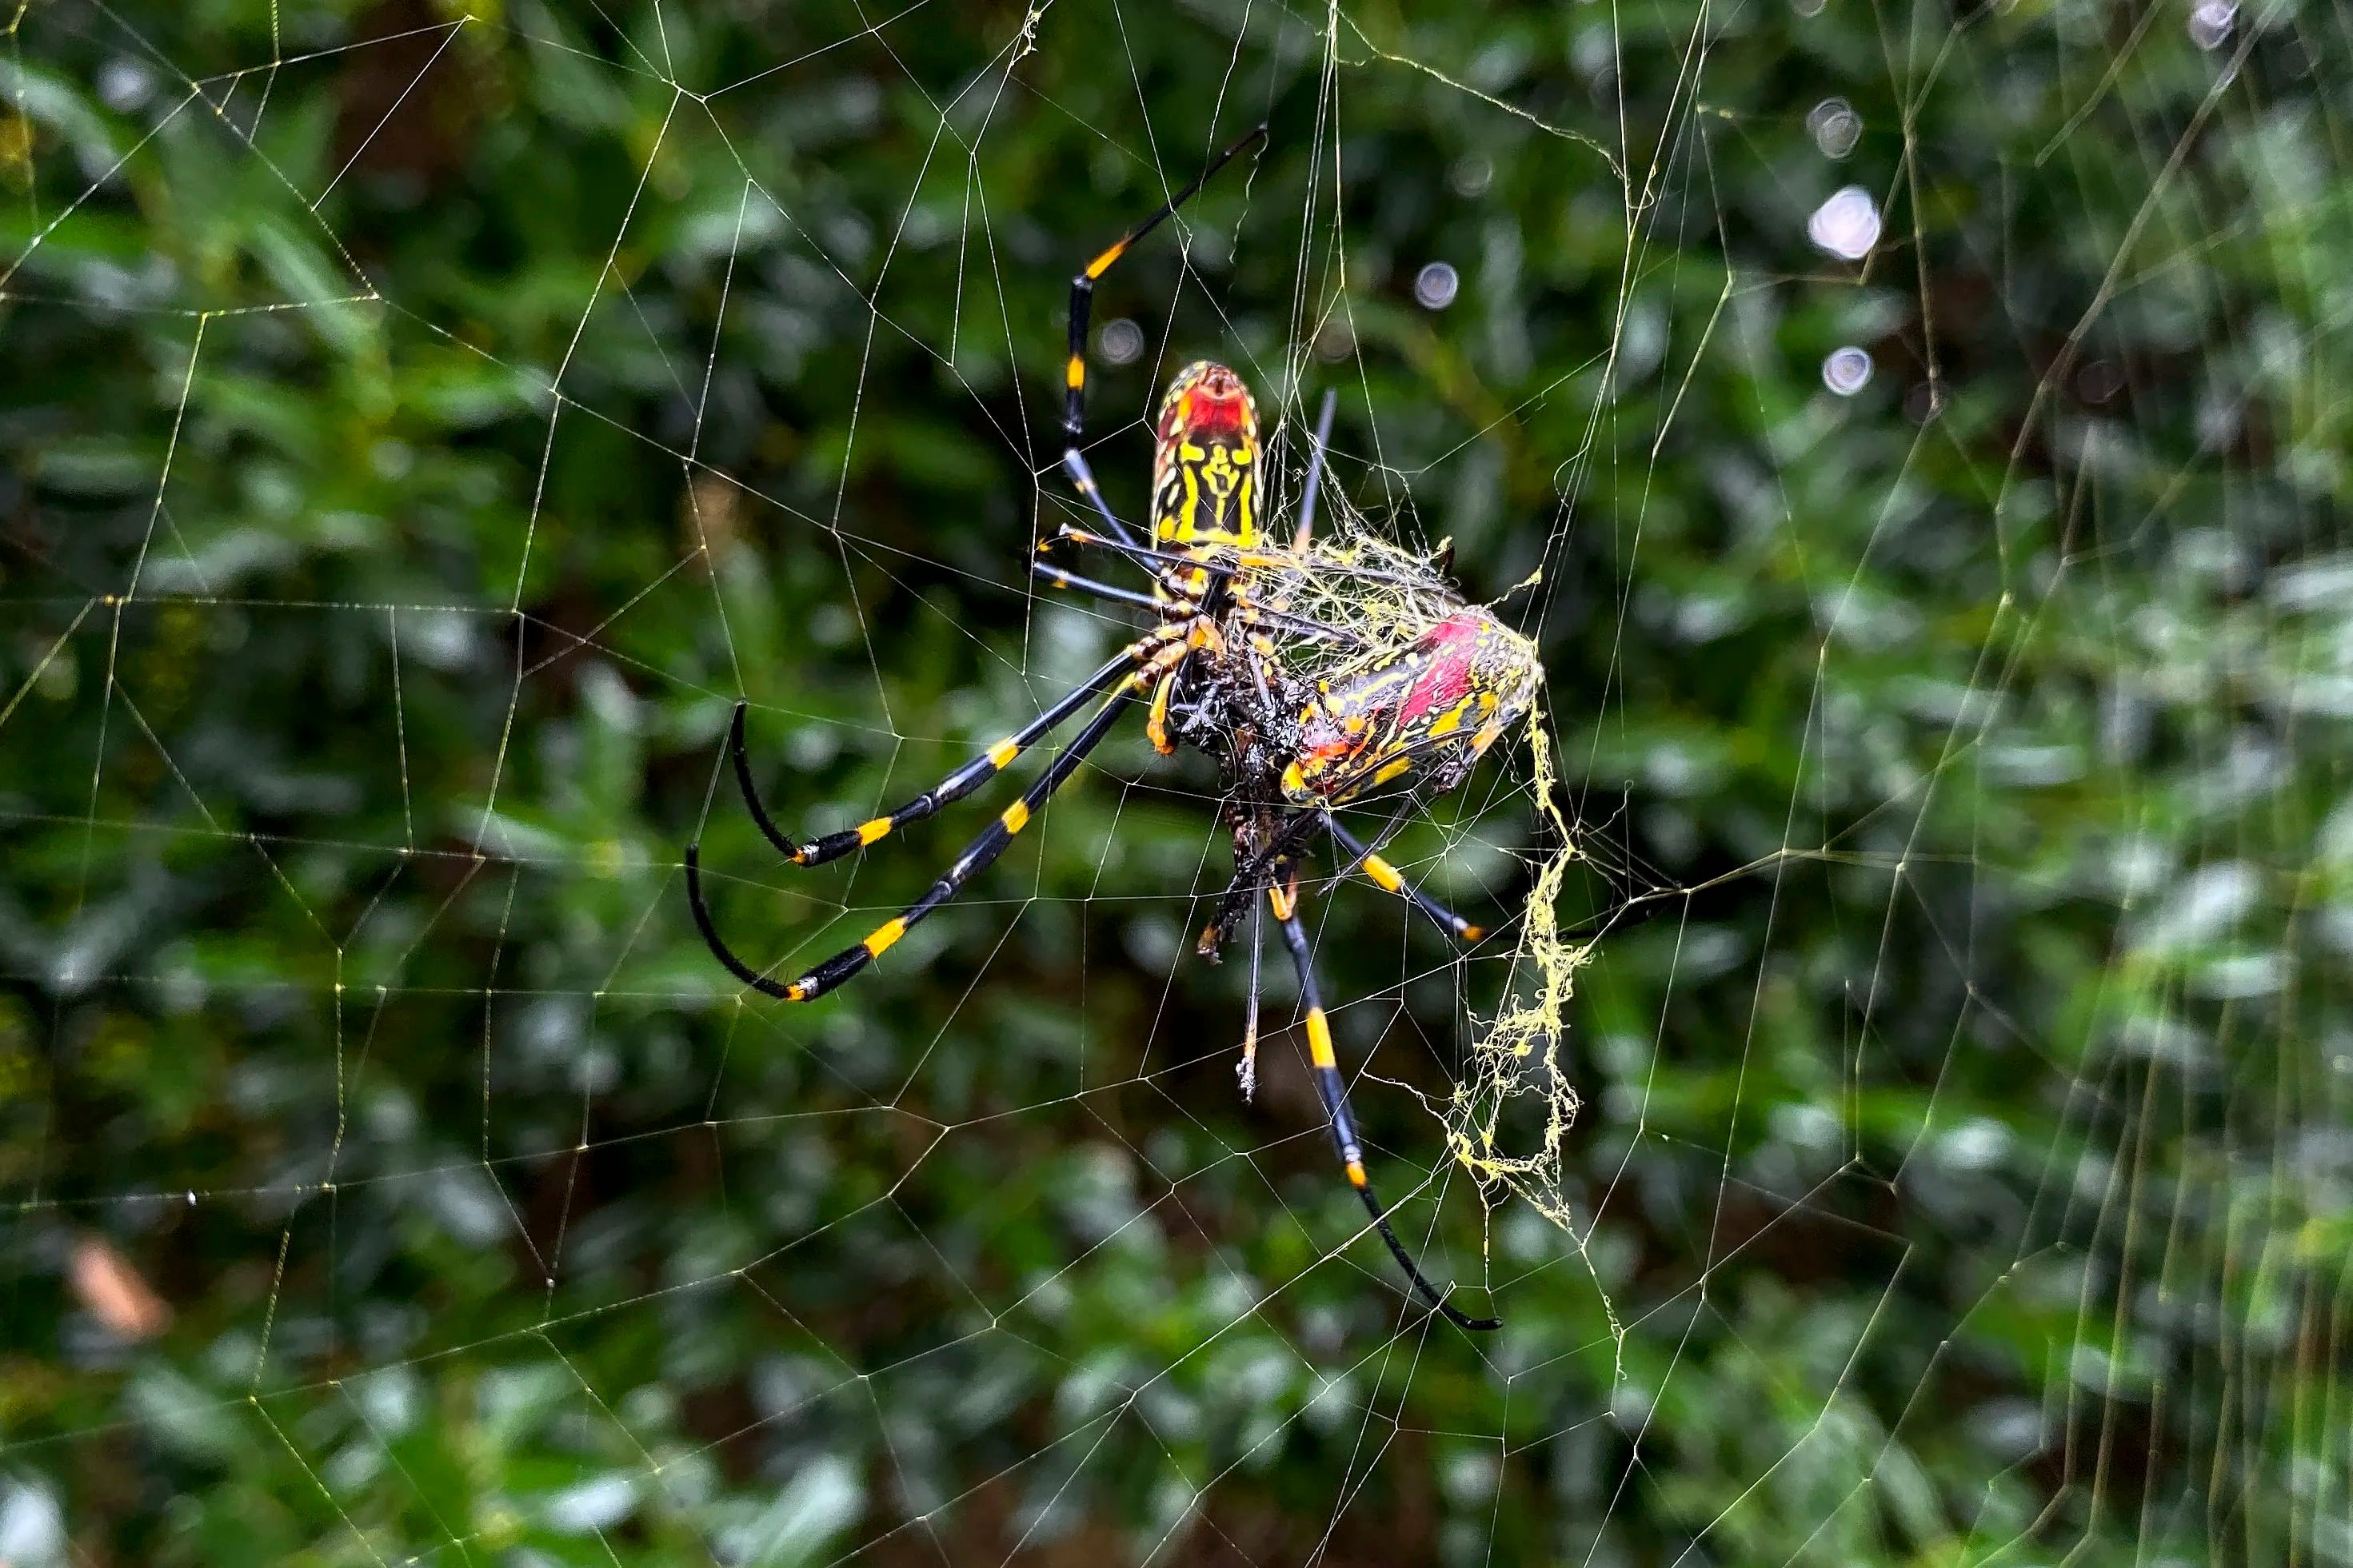 The joro spider, a large spider native to East Asia, is seen in Johns Creek, Ga., on Sunday, Oct. 24, 2021. The spider has spun its thick, golden web on power lines, porches and vegetable patches all over north Georgia this year – a proliferation that has driven some unnerved homeowners indoors and prompted a flood of anxious social media posts. (AP Photo/Alex Sanz)